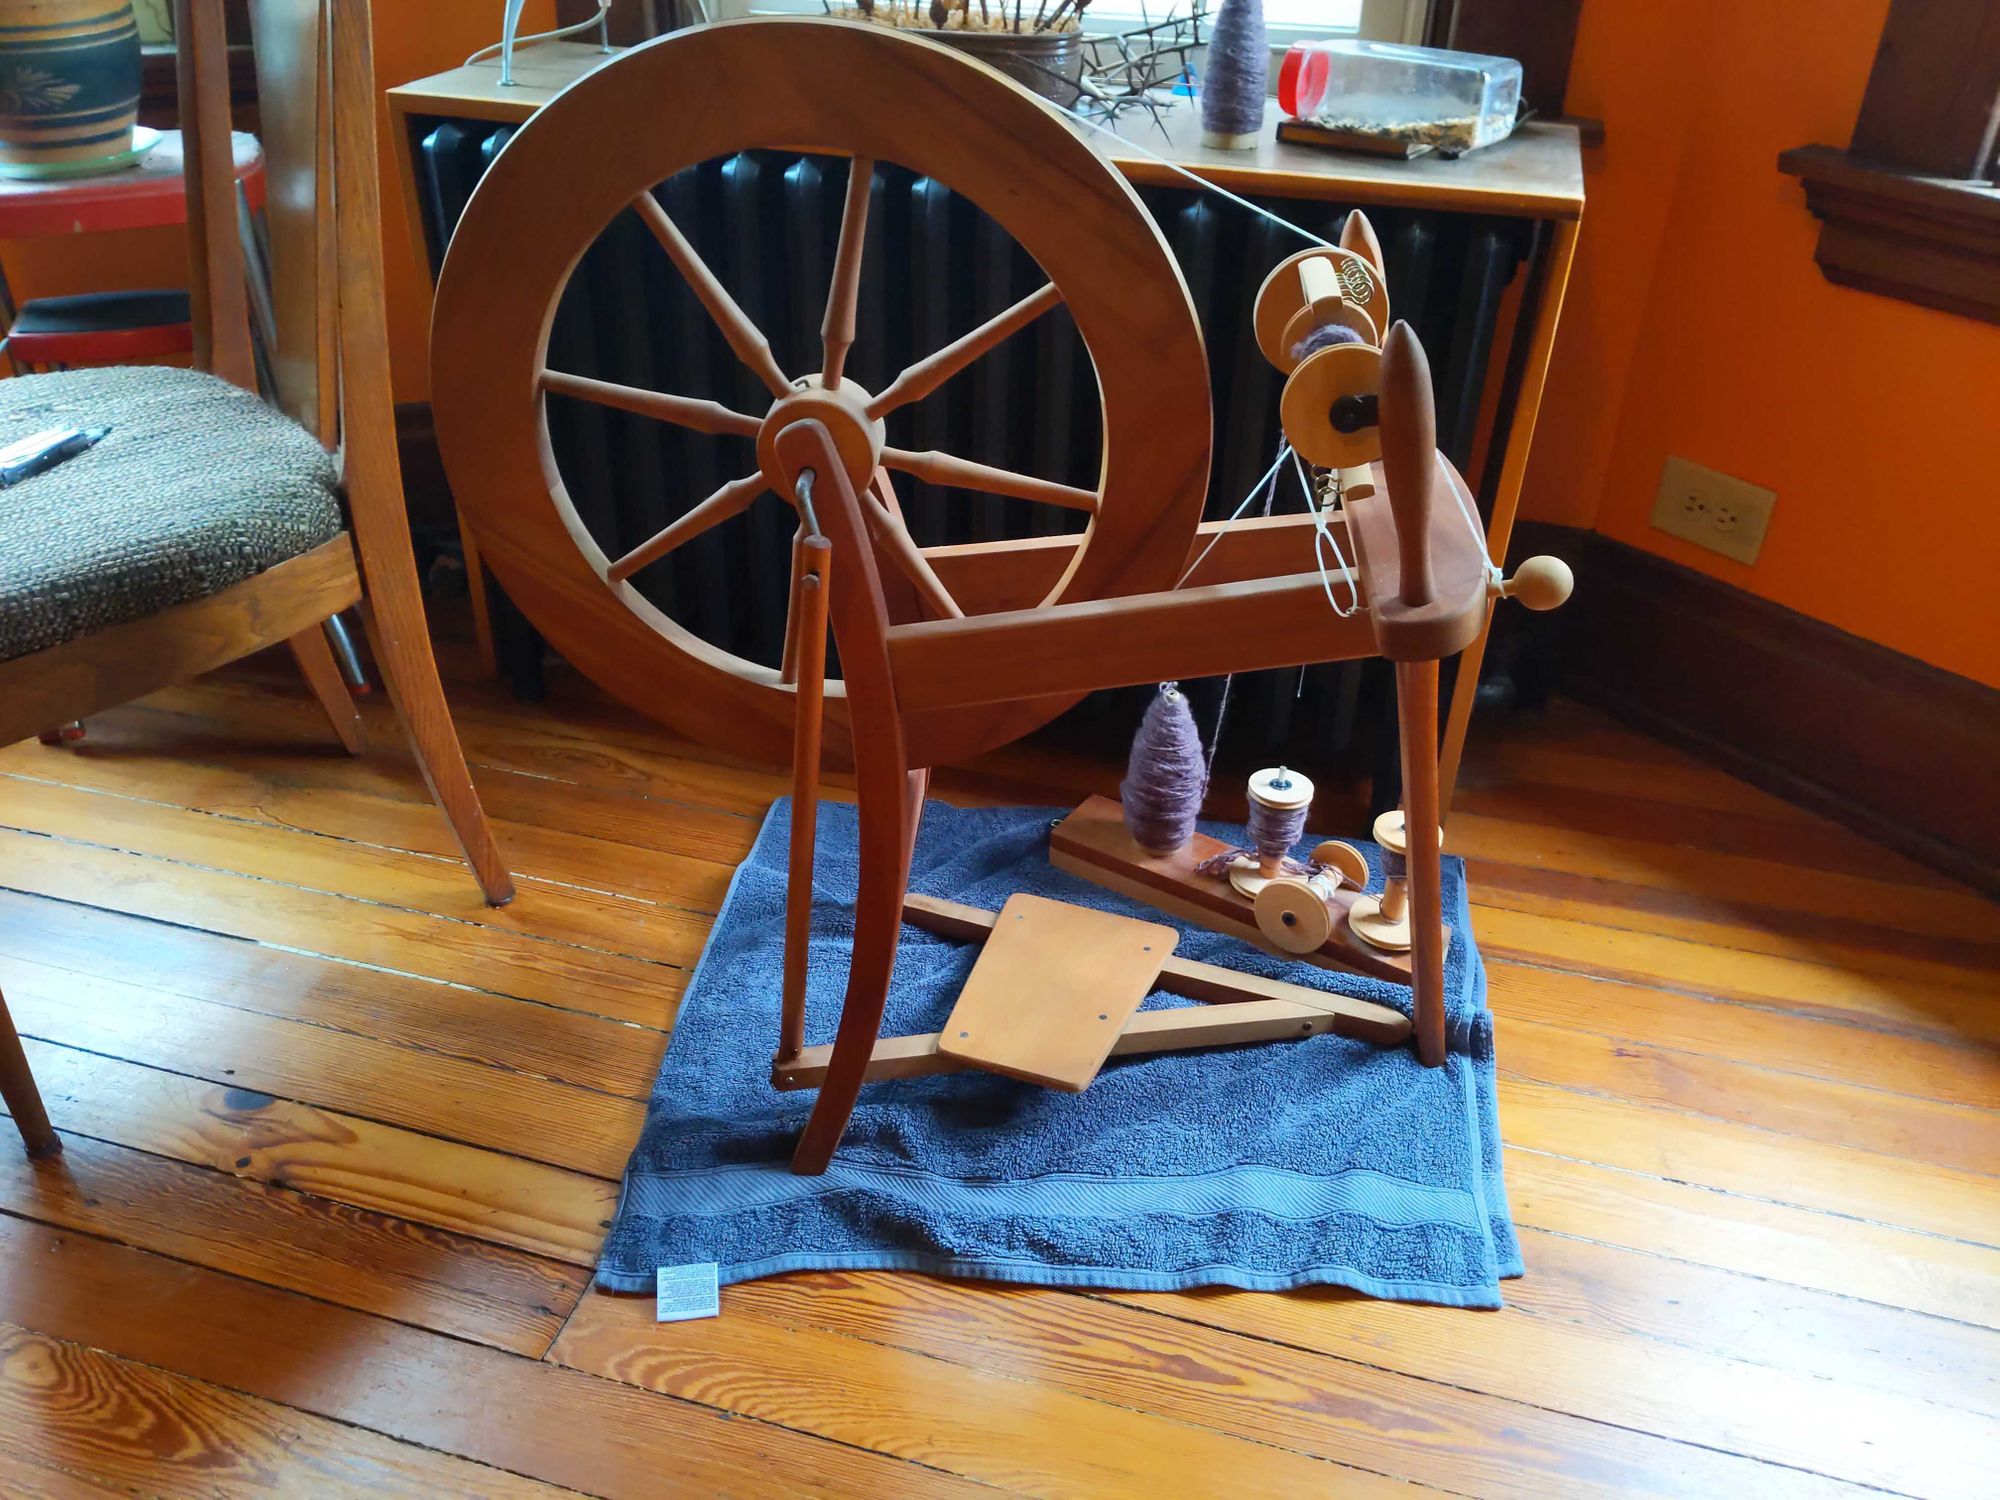 A spinning wheel sitting on a blue towel in the middle of a wood floor with a purple fiber being spun.